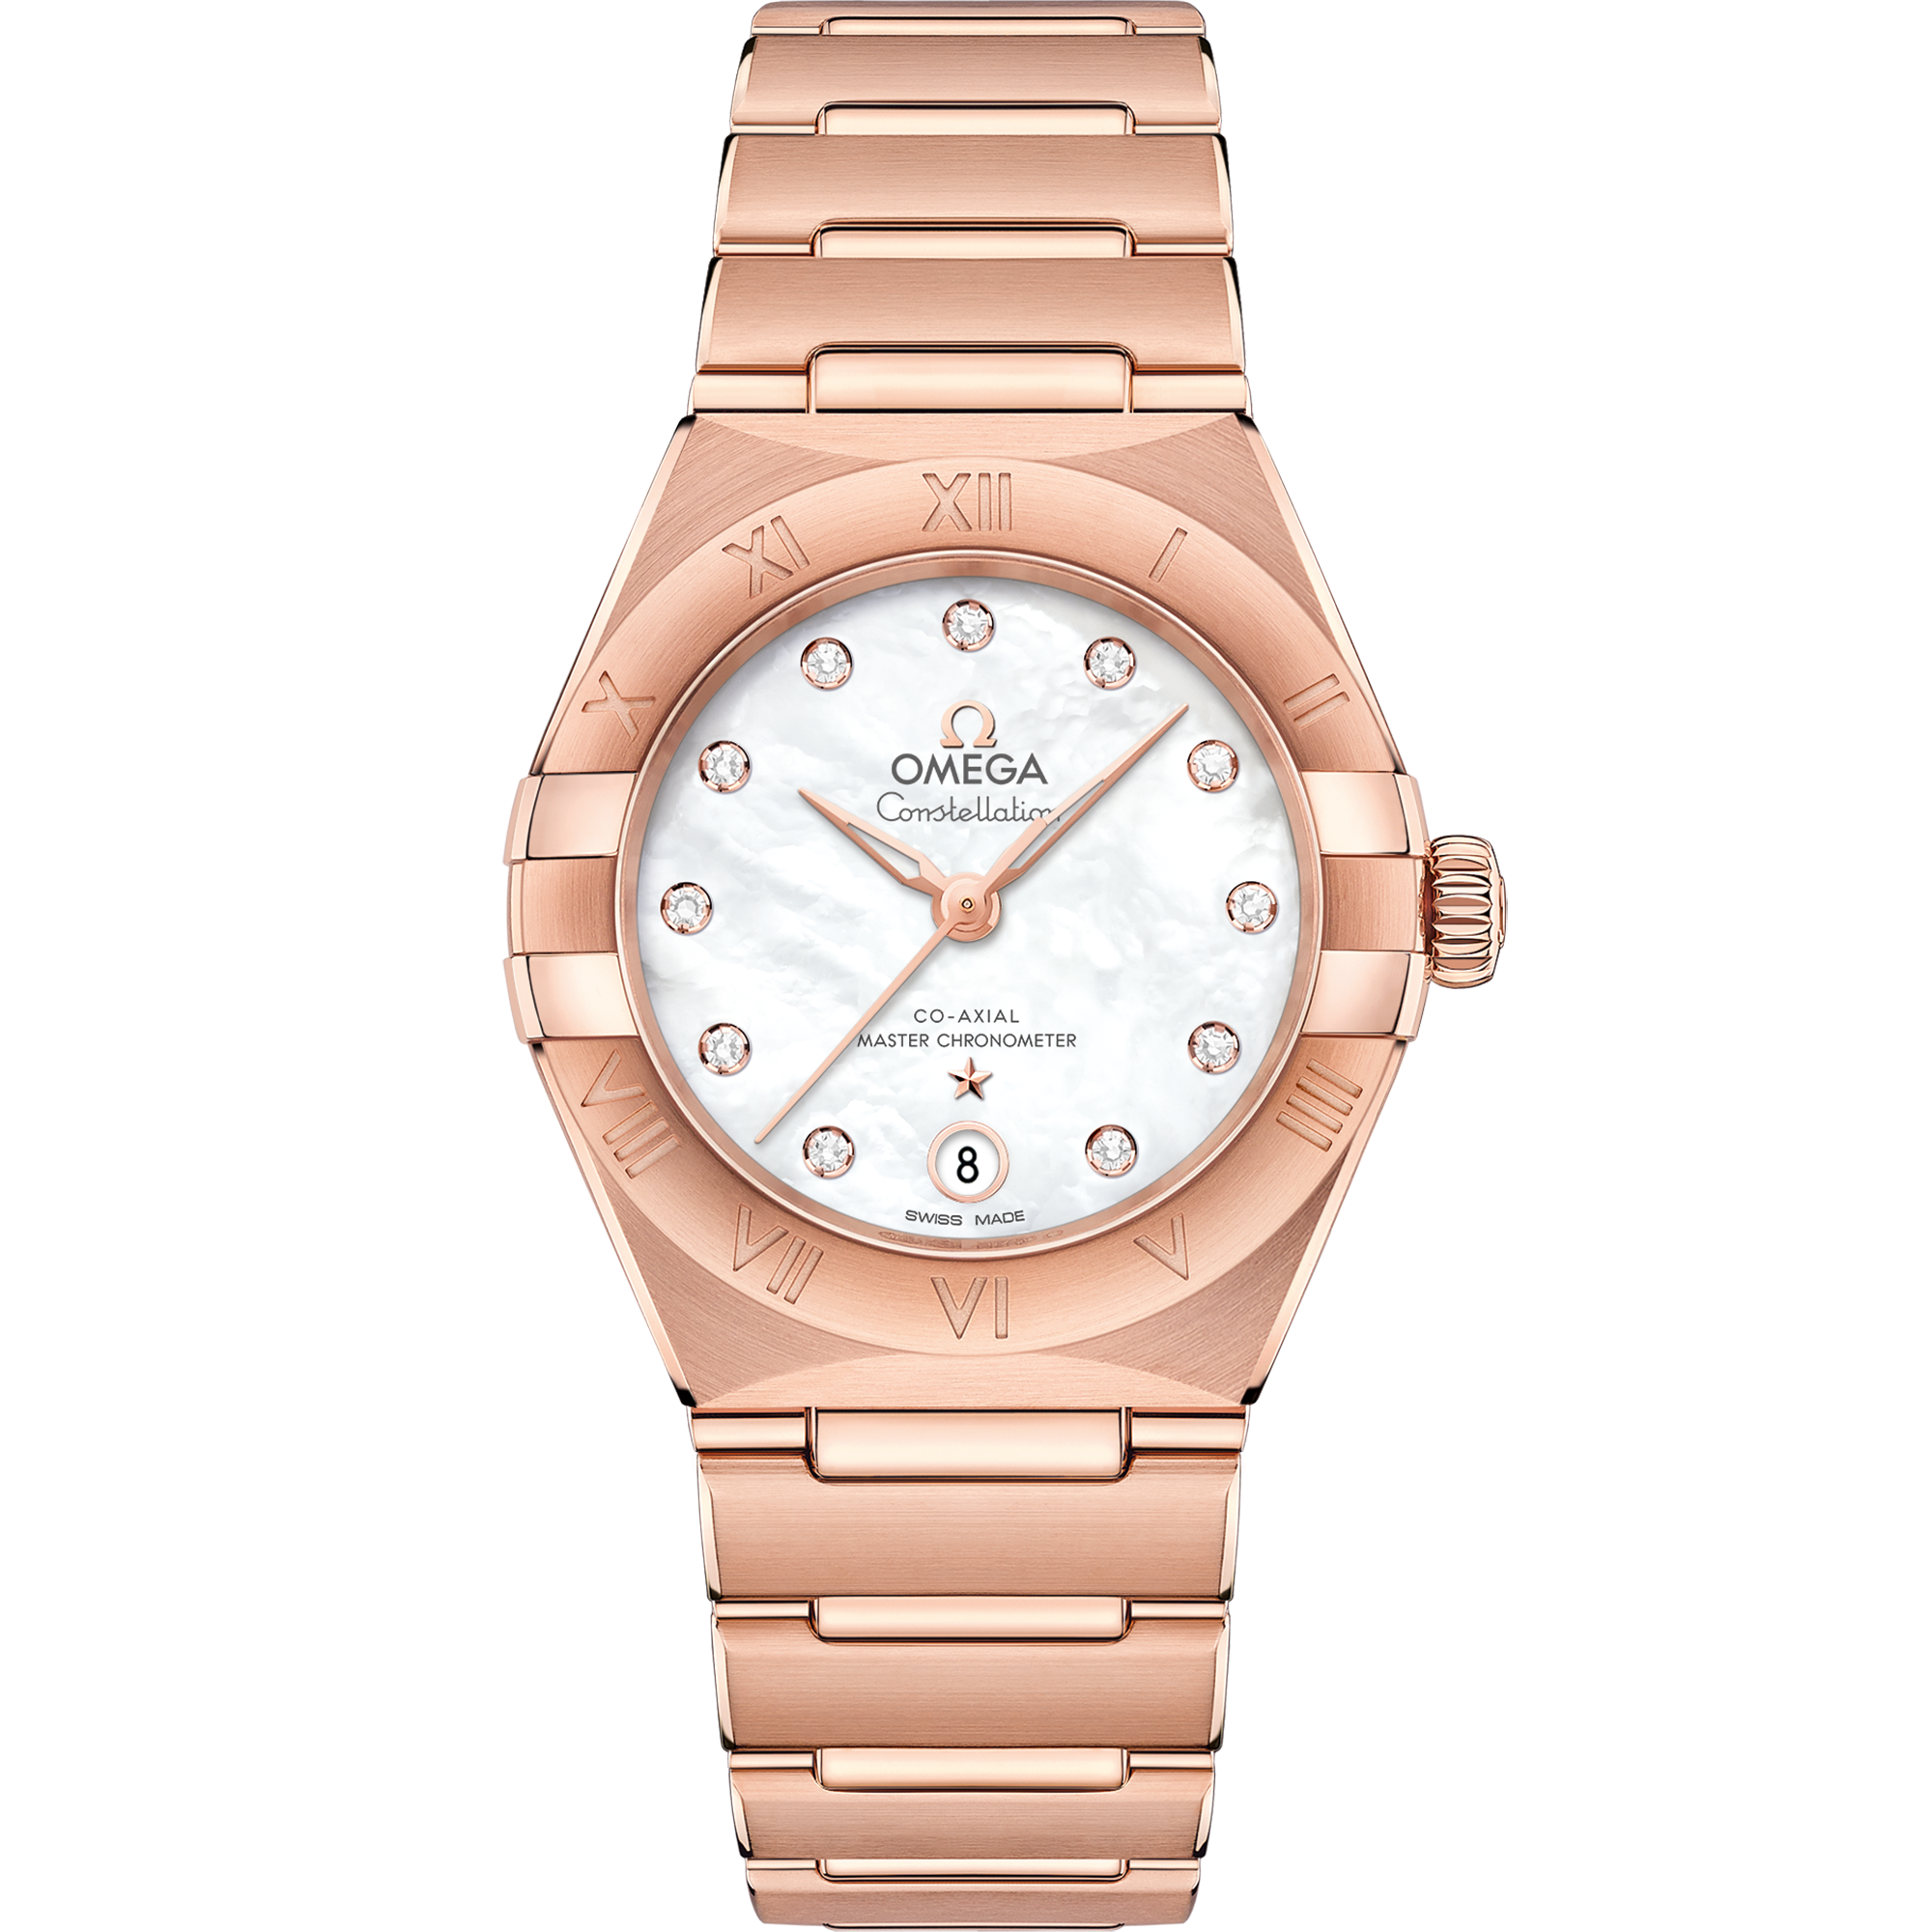 Constellation 29 mm, ouro Sedna™ em ouro Sedna™ - 131.50.29.20.55.001